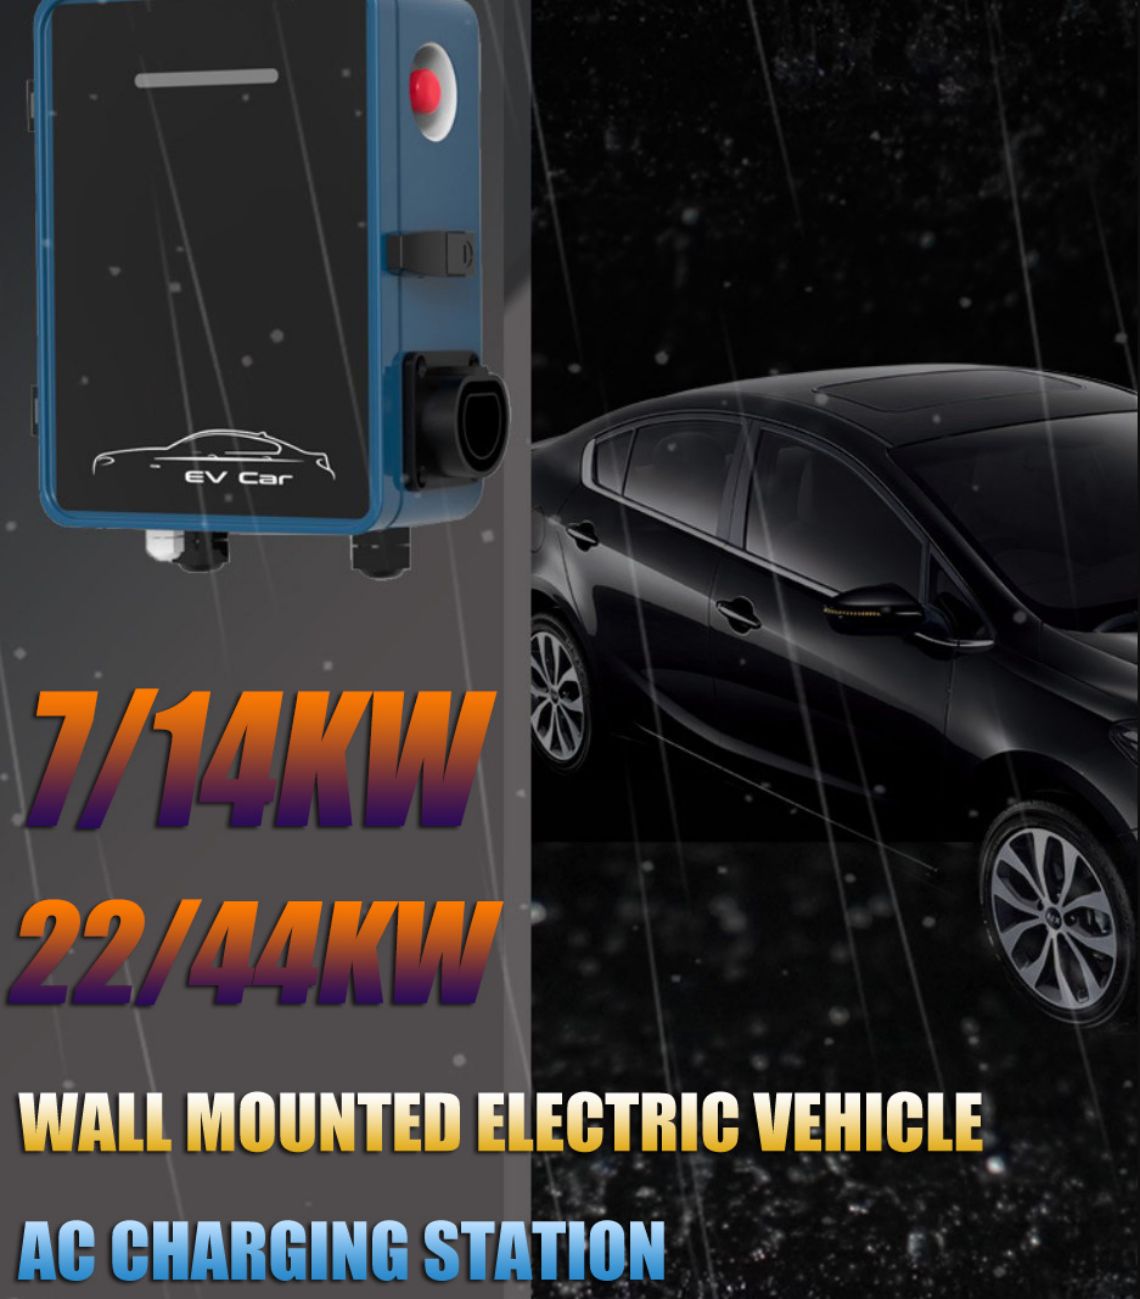 wall mounted electric vehicle AC charging station